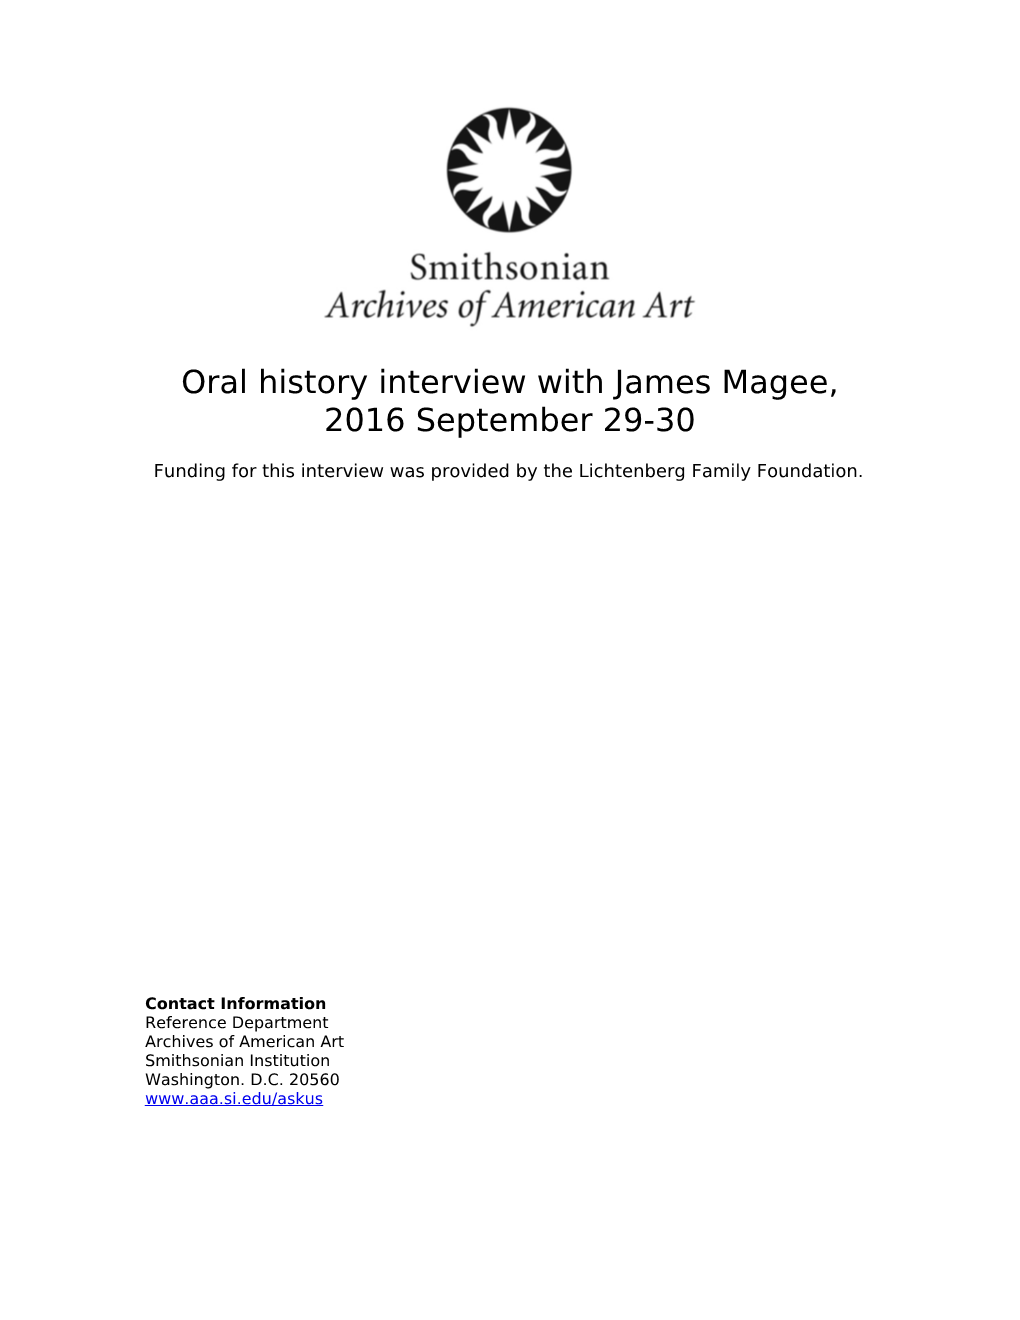 Oral History Interview with James Magee, 2016 September 29-30